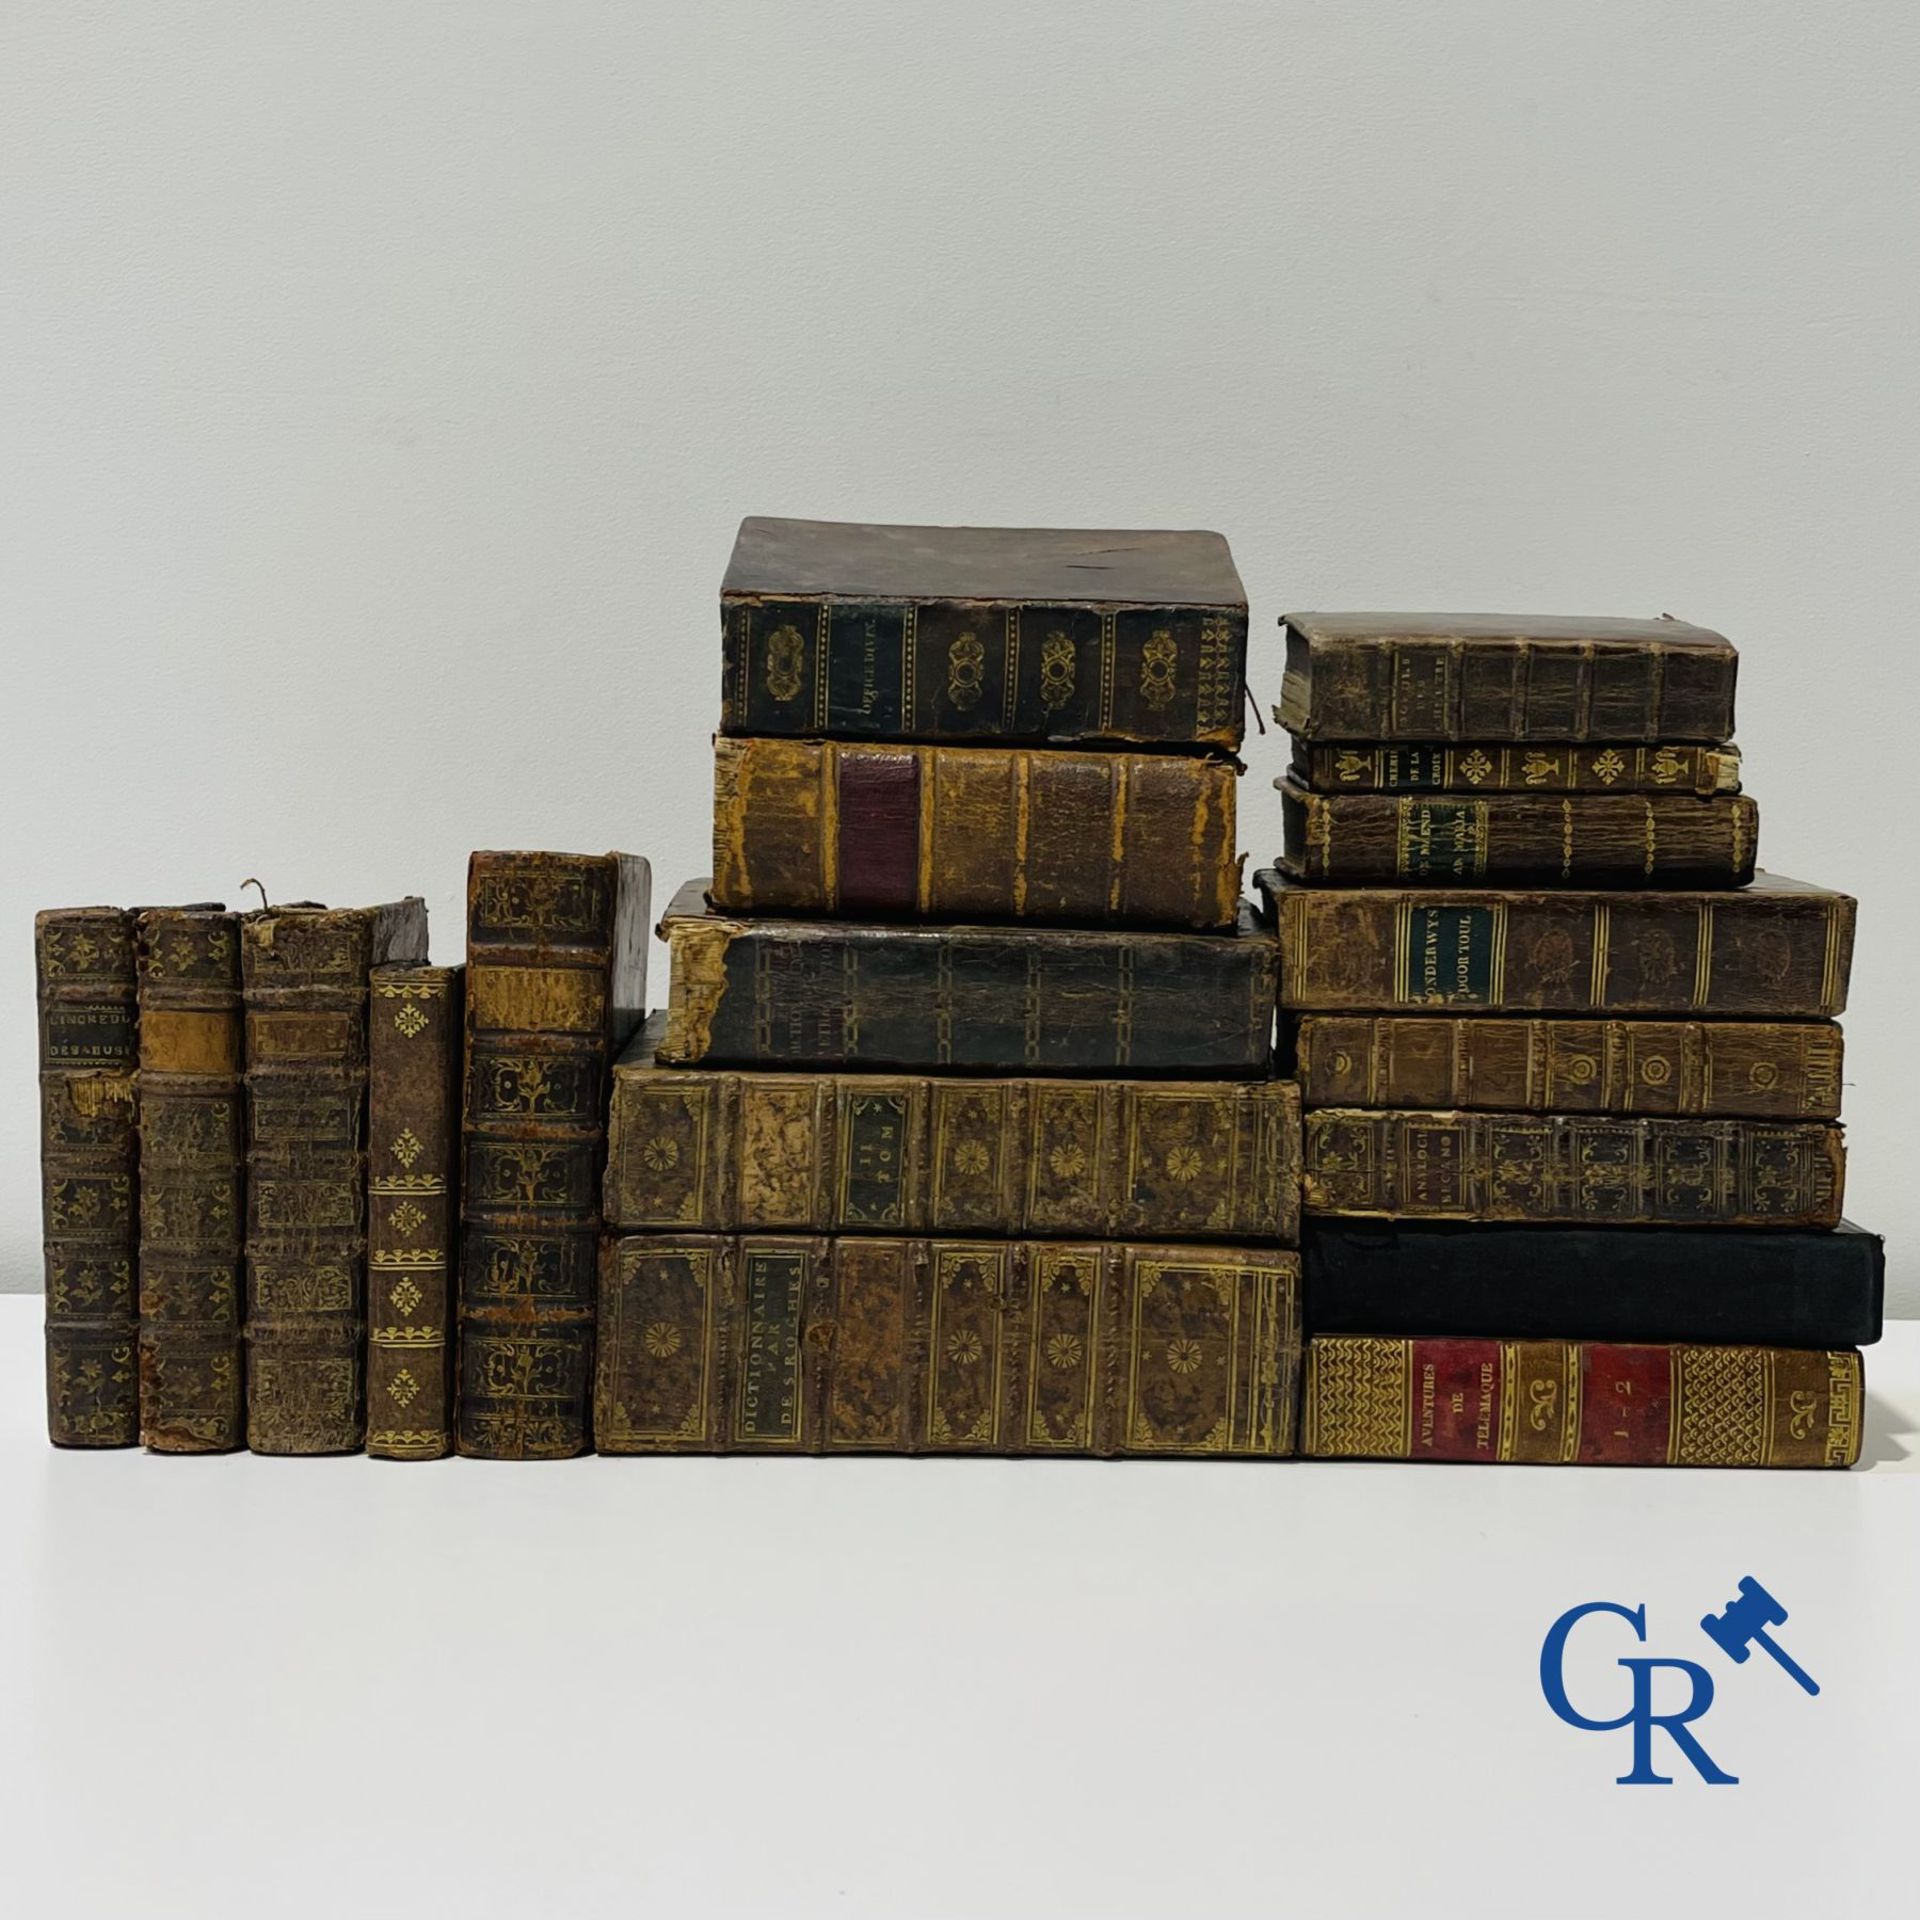 Early printed books: An interesting lot with various antique books. 17th-18th-19th century. (18 volu